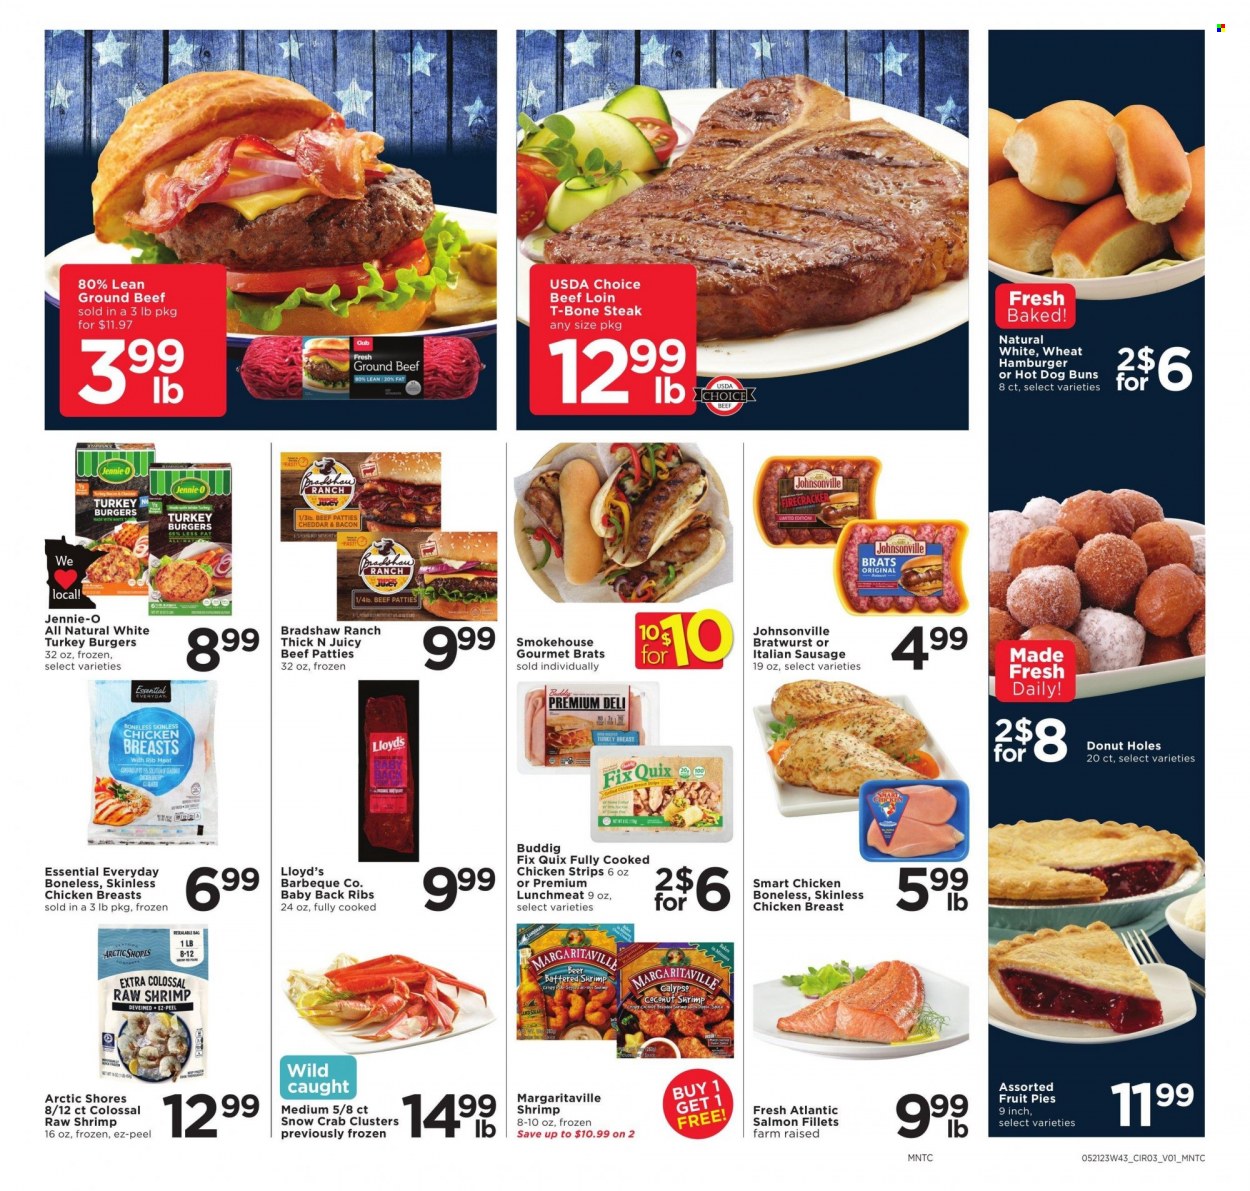 thumbnail - Cub Foods Flyer - 05/21/2023 - 05/27/2023 - Sales products - pie, buns, donut holes, salmon, salmon fillet, crab, shrimps, Arctic Shores, crab clusters, Johnsonville, bratwurst, sausage, italian sausage, lunch meat, cheese, strips, chicken strips, alcohol, beer, turkey breast, chicken breasts, chicken, turkey, ground beef, t-bone steak, steak, ribs, turkey burger, pork meat, pork ribs, pork back ribs, bag. Page 4.